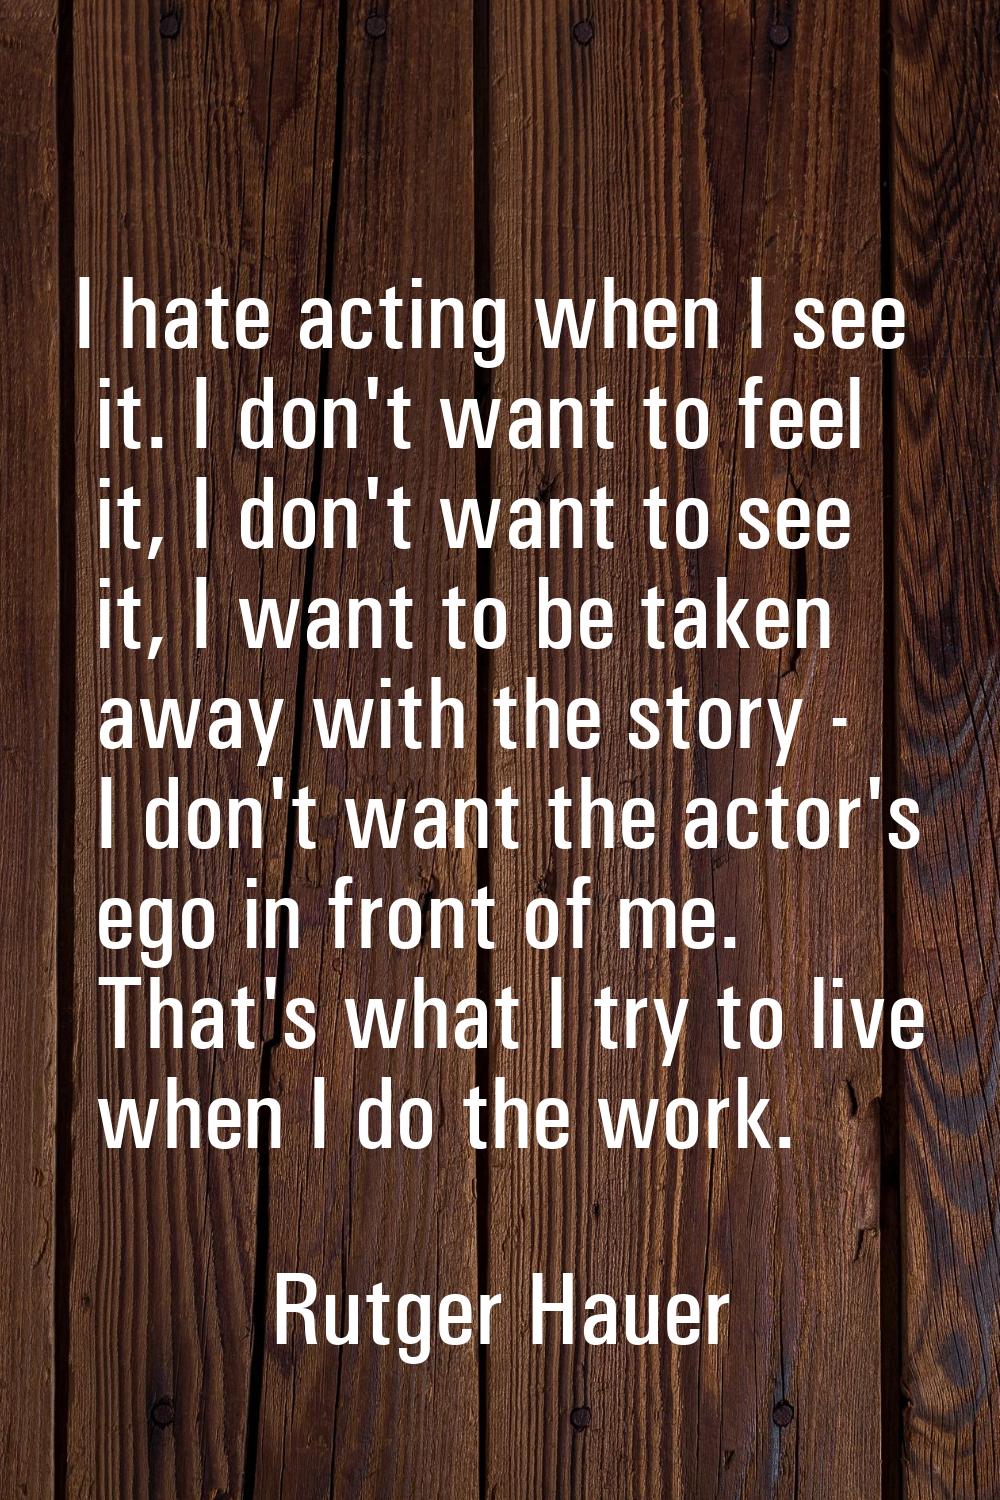 I hate acting when I see it. I don't want to feel it, I don't want to see it, I want to be taken aw